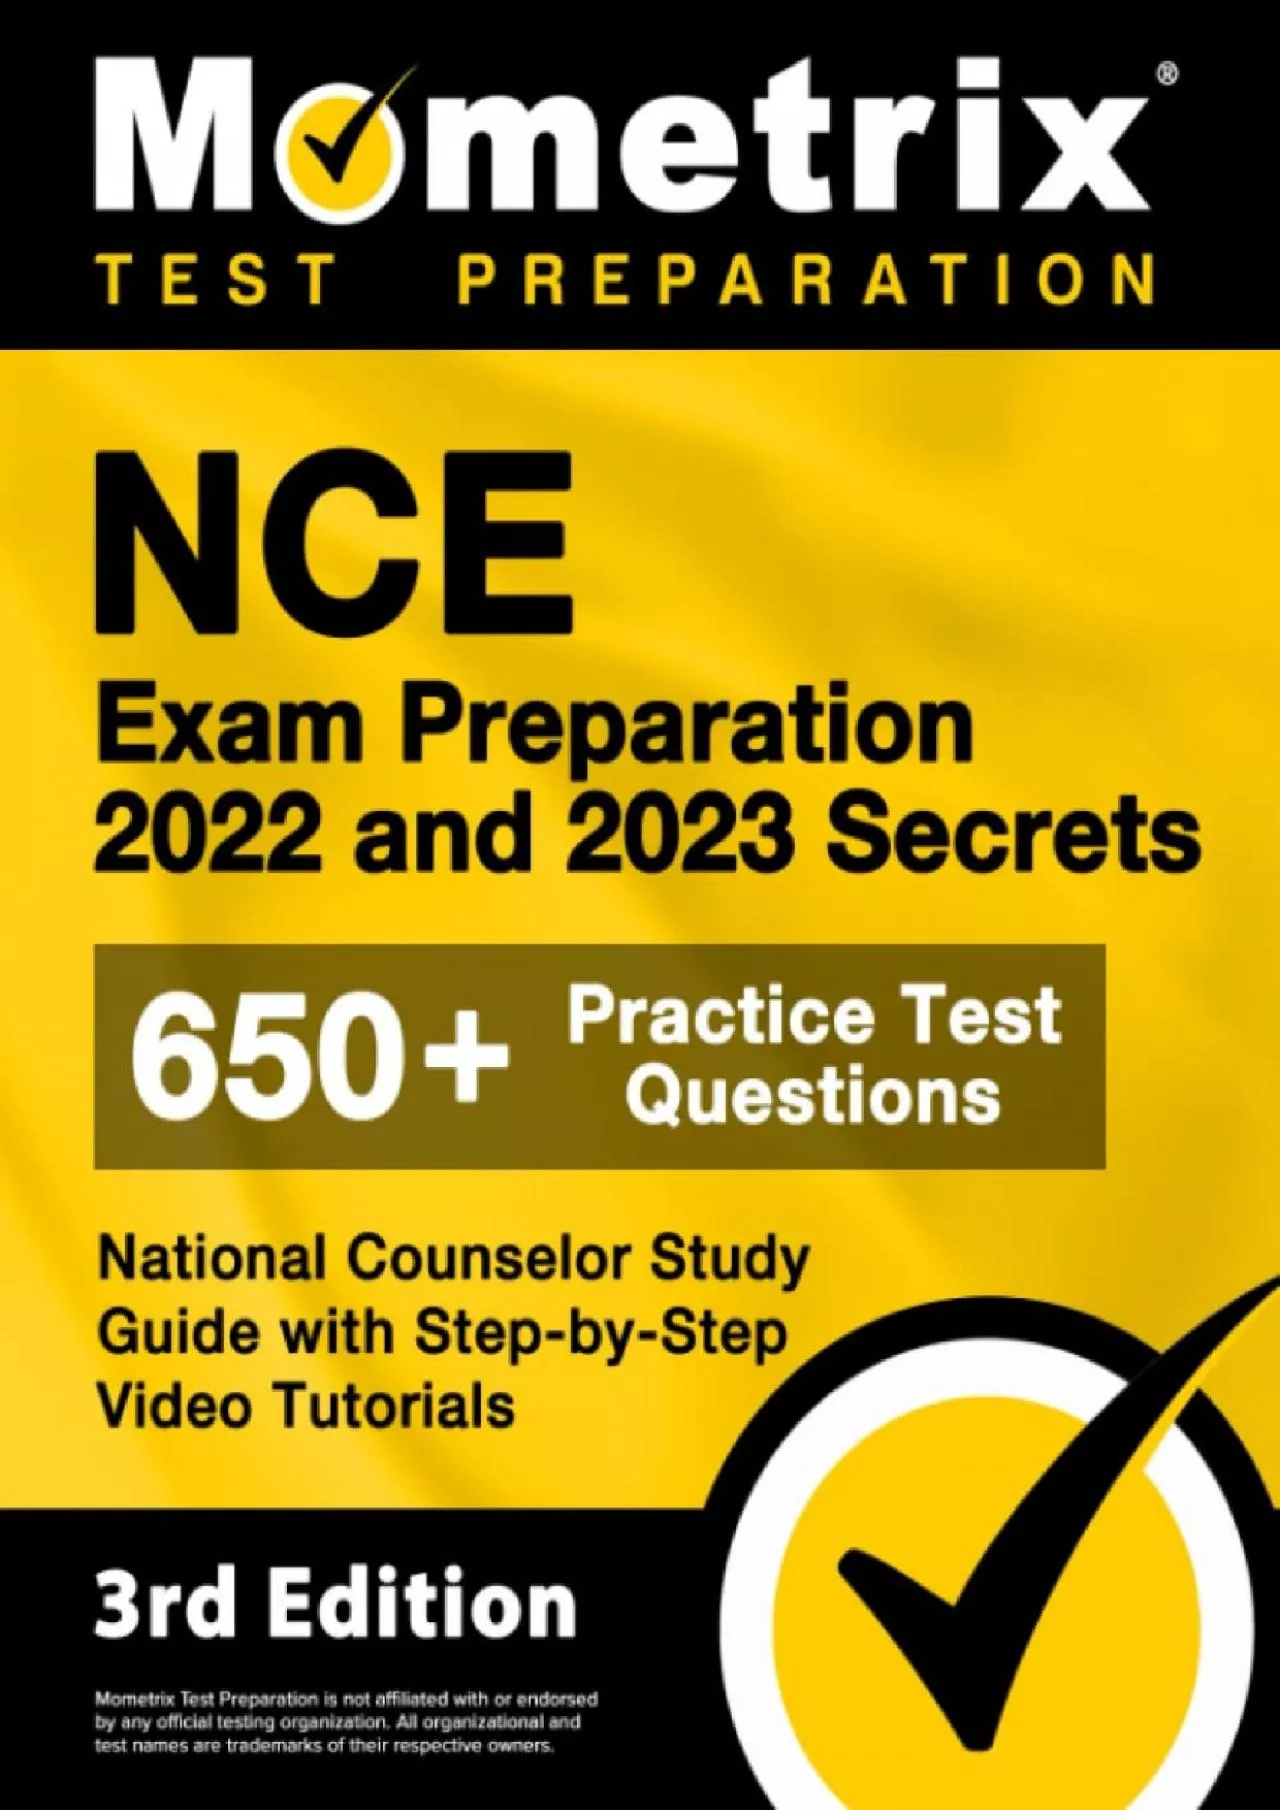 [READ] NCE Exam Preparation 2022 and 2023 Secrets: 650+ Practice Test Questions, National